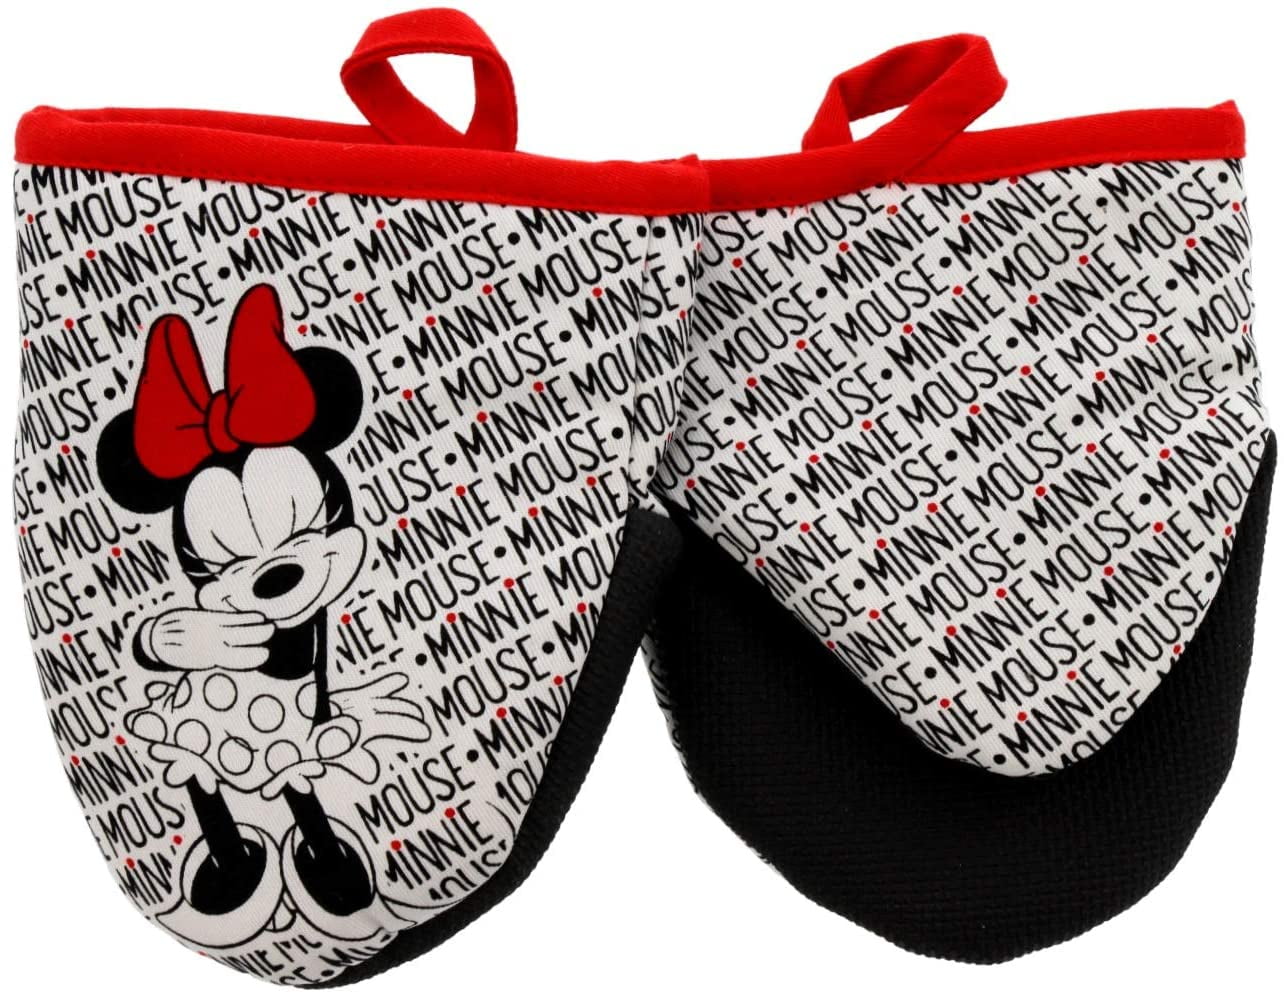 Details about   NWT Disney Mickey and Minnie Mouse Oversized Oven Mit & Pot Holder Kitchen Set 